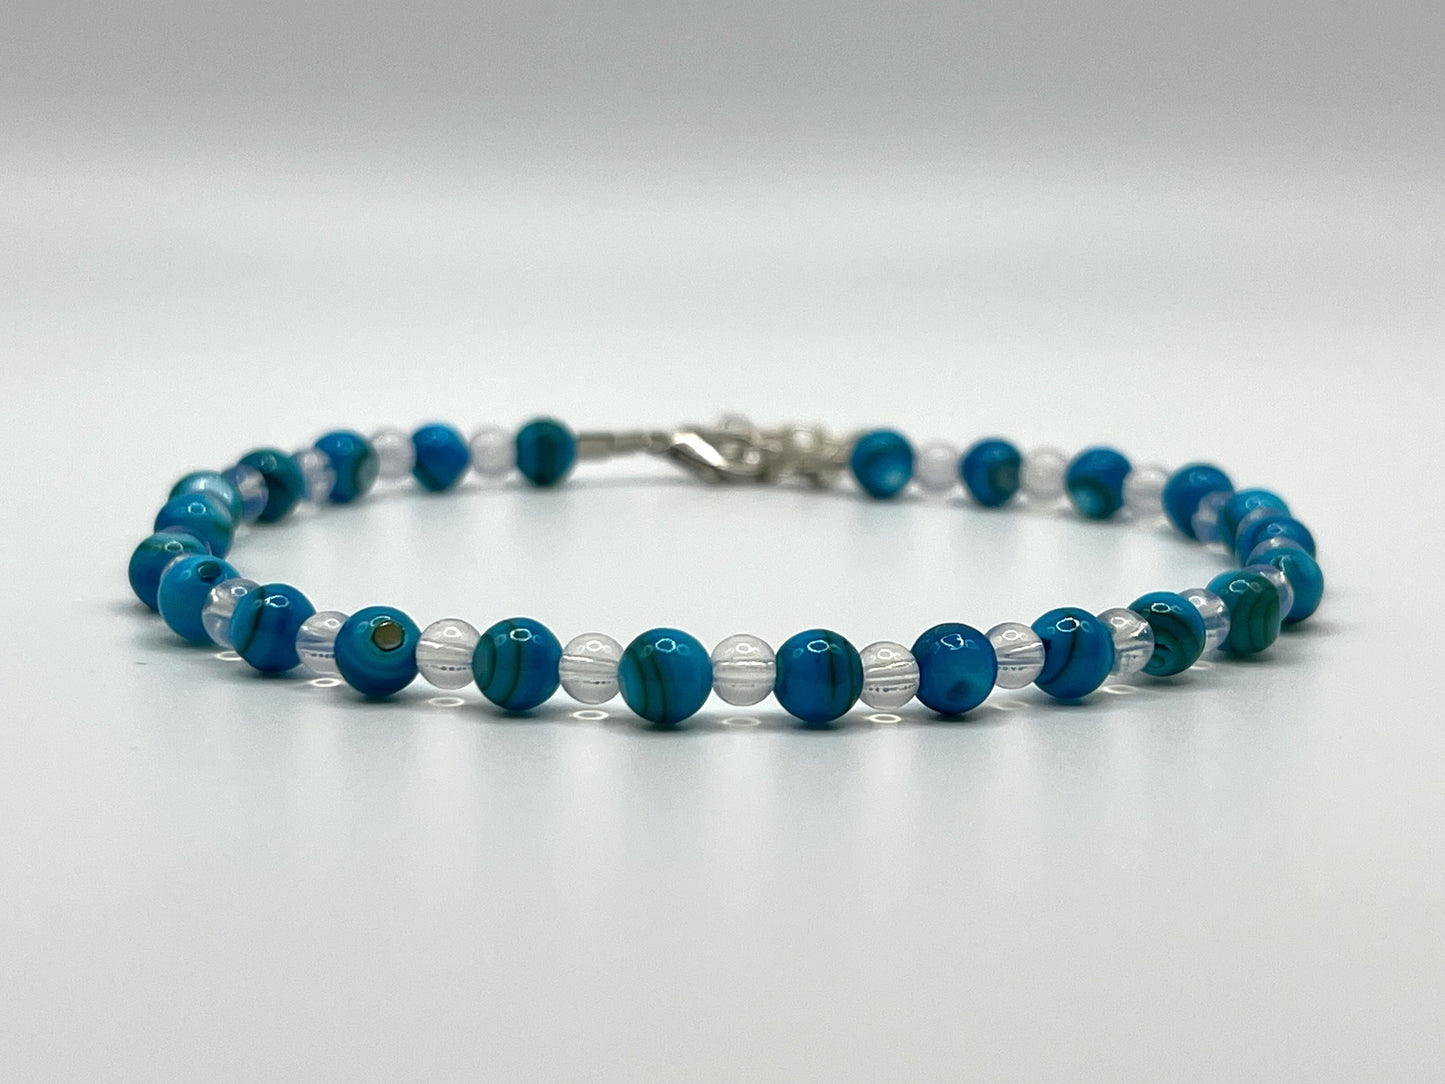 OCEAN WAVES Glass Bead Necklace